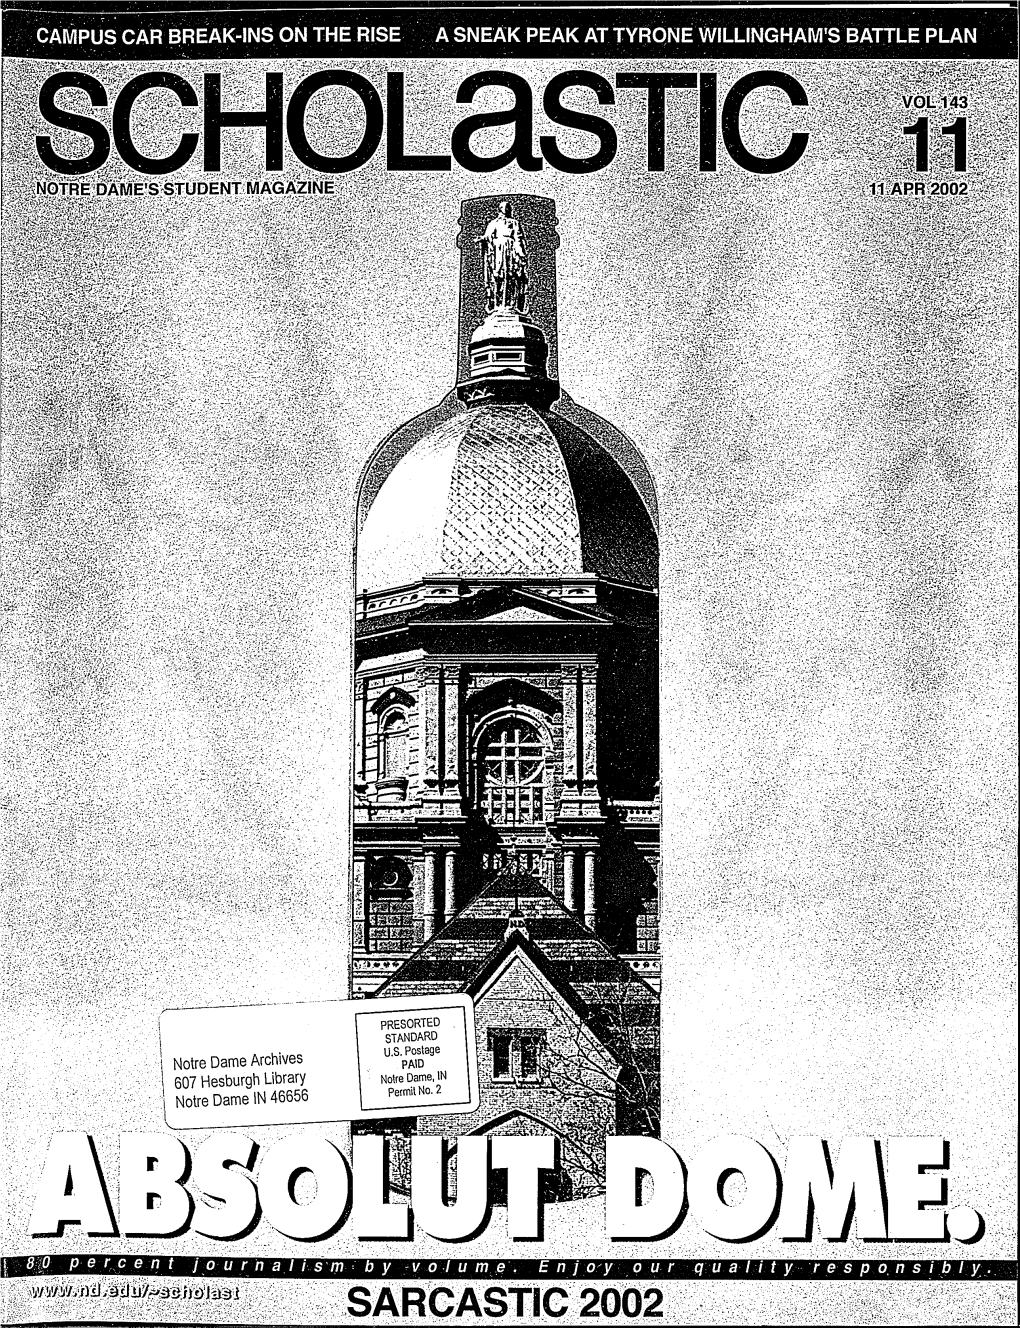 SUBSCRIBE TODAY DOVERSBERGER GREENBERG to the Only Student-Produced Magazine Serving Notre Dame Students, Parents and Alumni